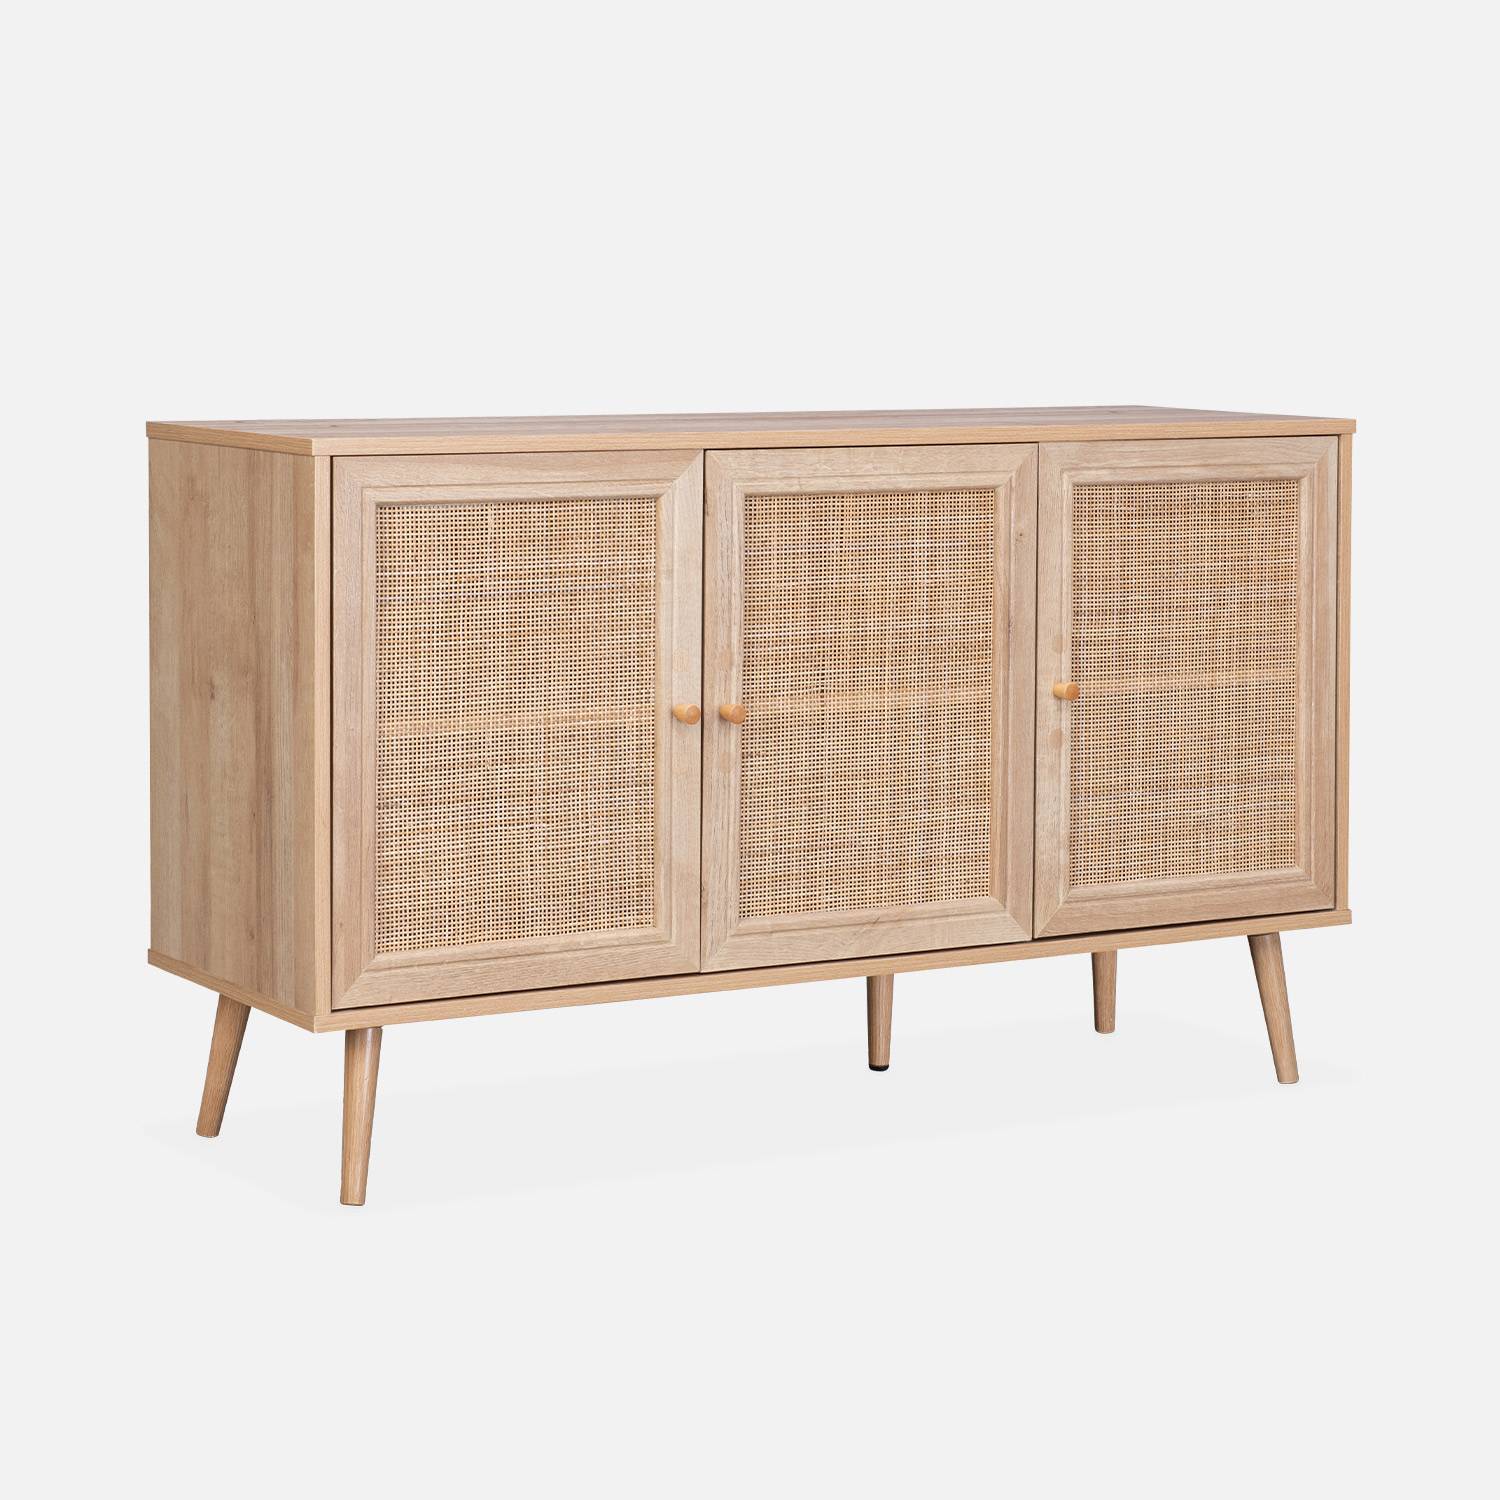 Wooden and cane rattan detail sideboard with 3 doors, 2 shelves, Scandi-style legs, 120x39x70cm - Boheme - Natural wood colour Photo3